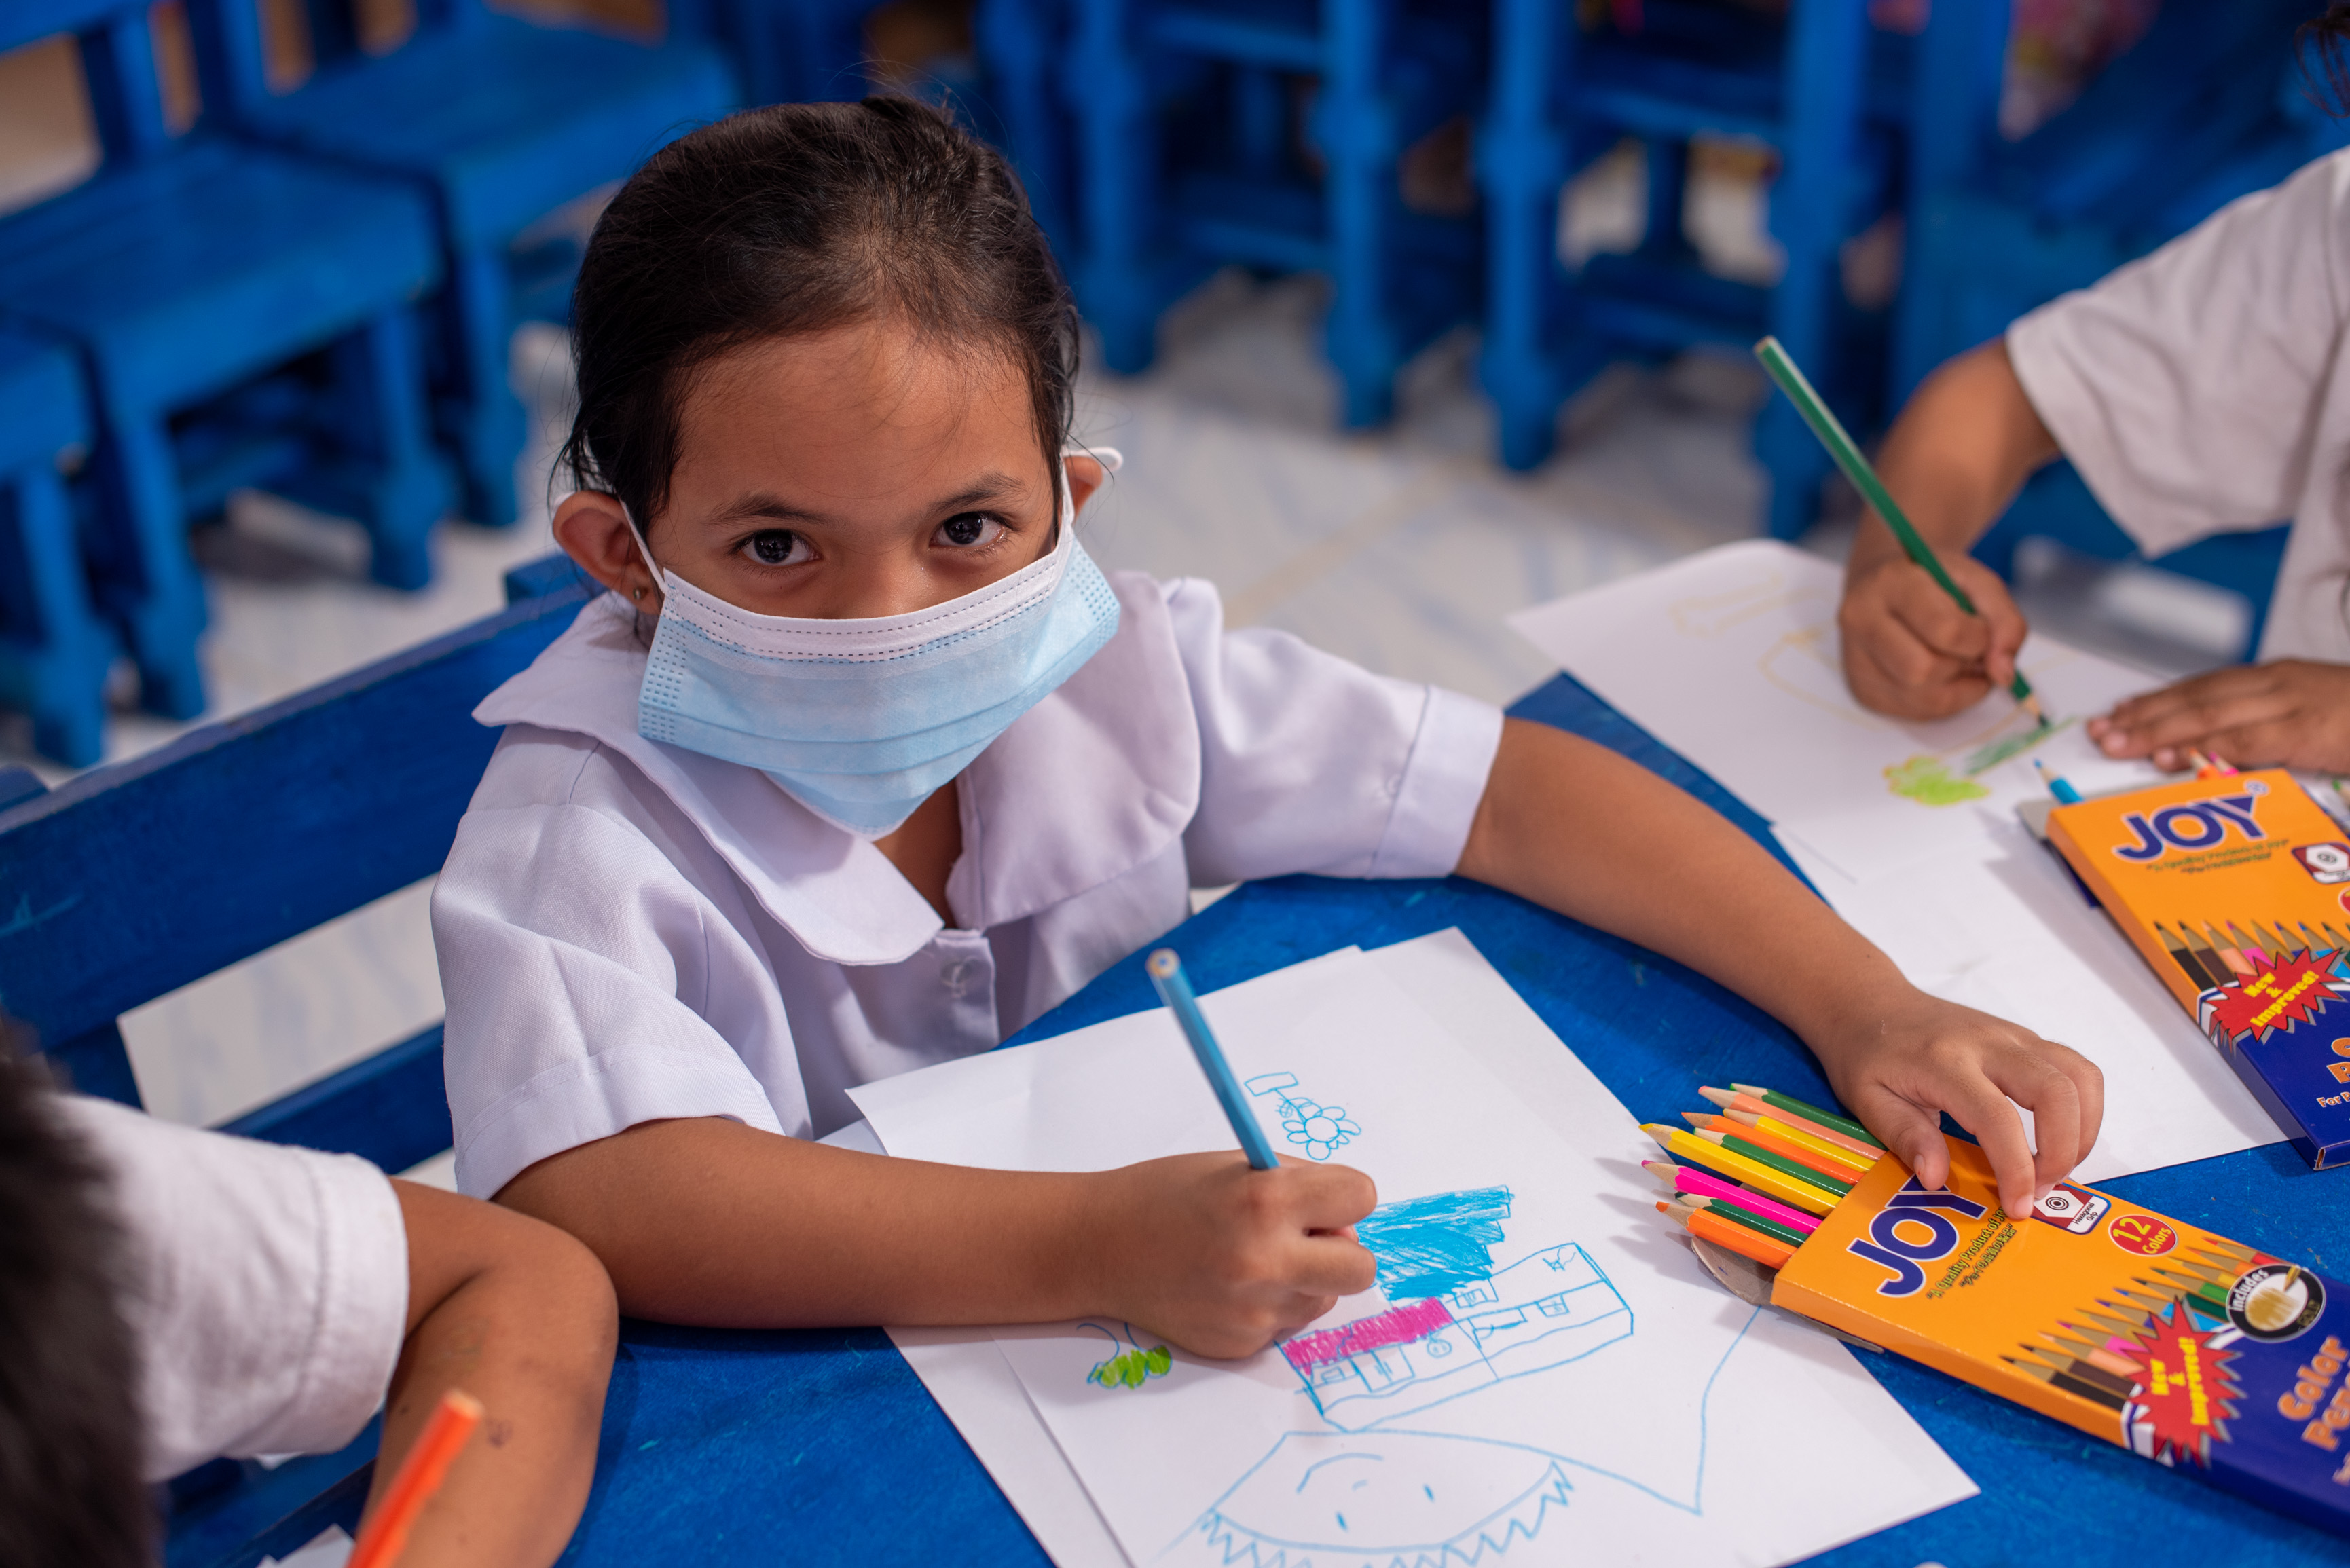 Girls from the Philippines wearing a face mask and school uniform looks up to the camera while drawing at school